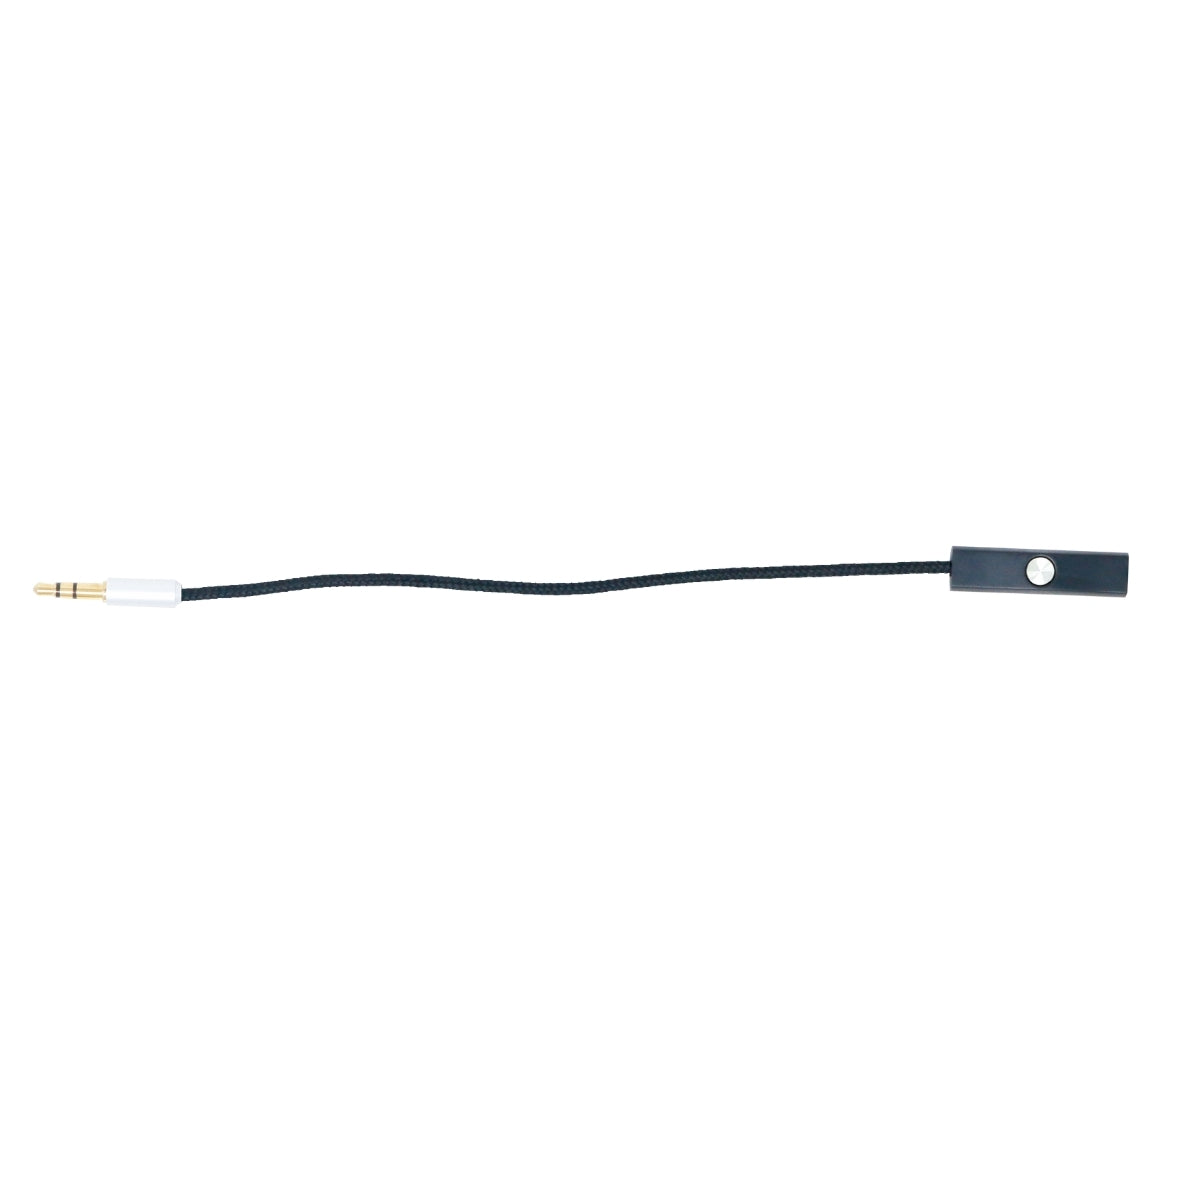 Cerwin Vega 6ft hands free audio cable